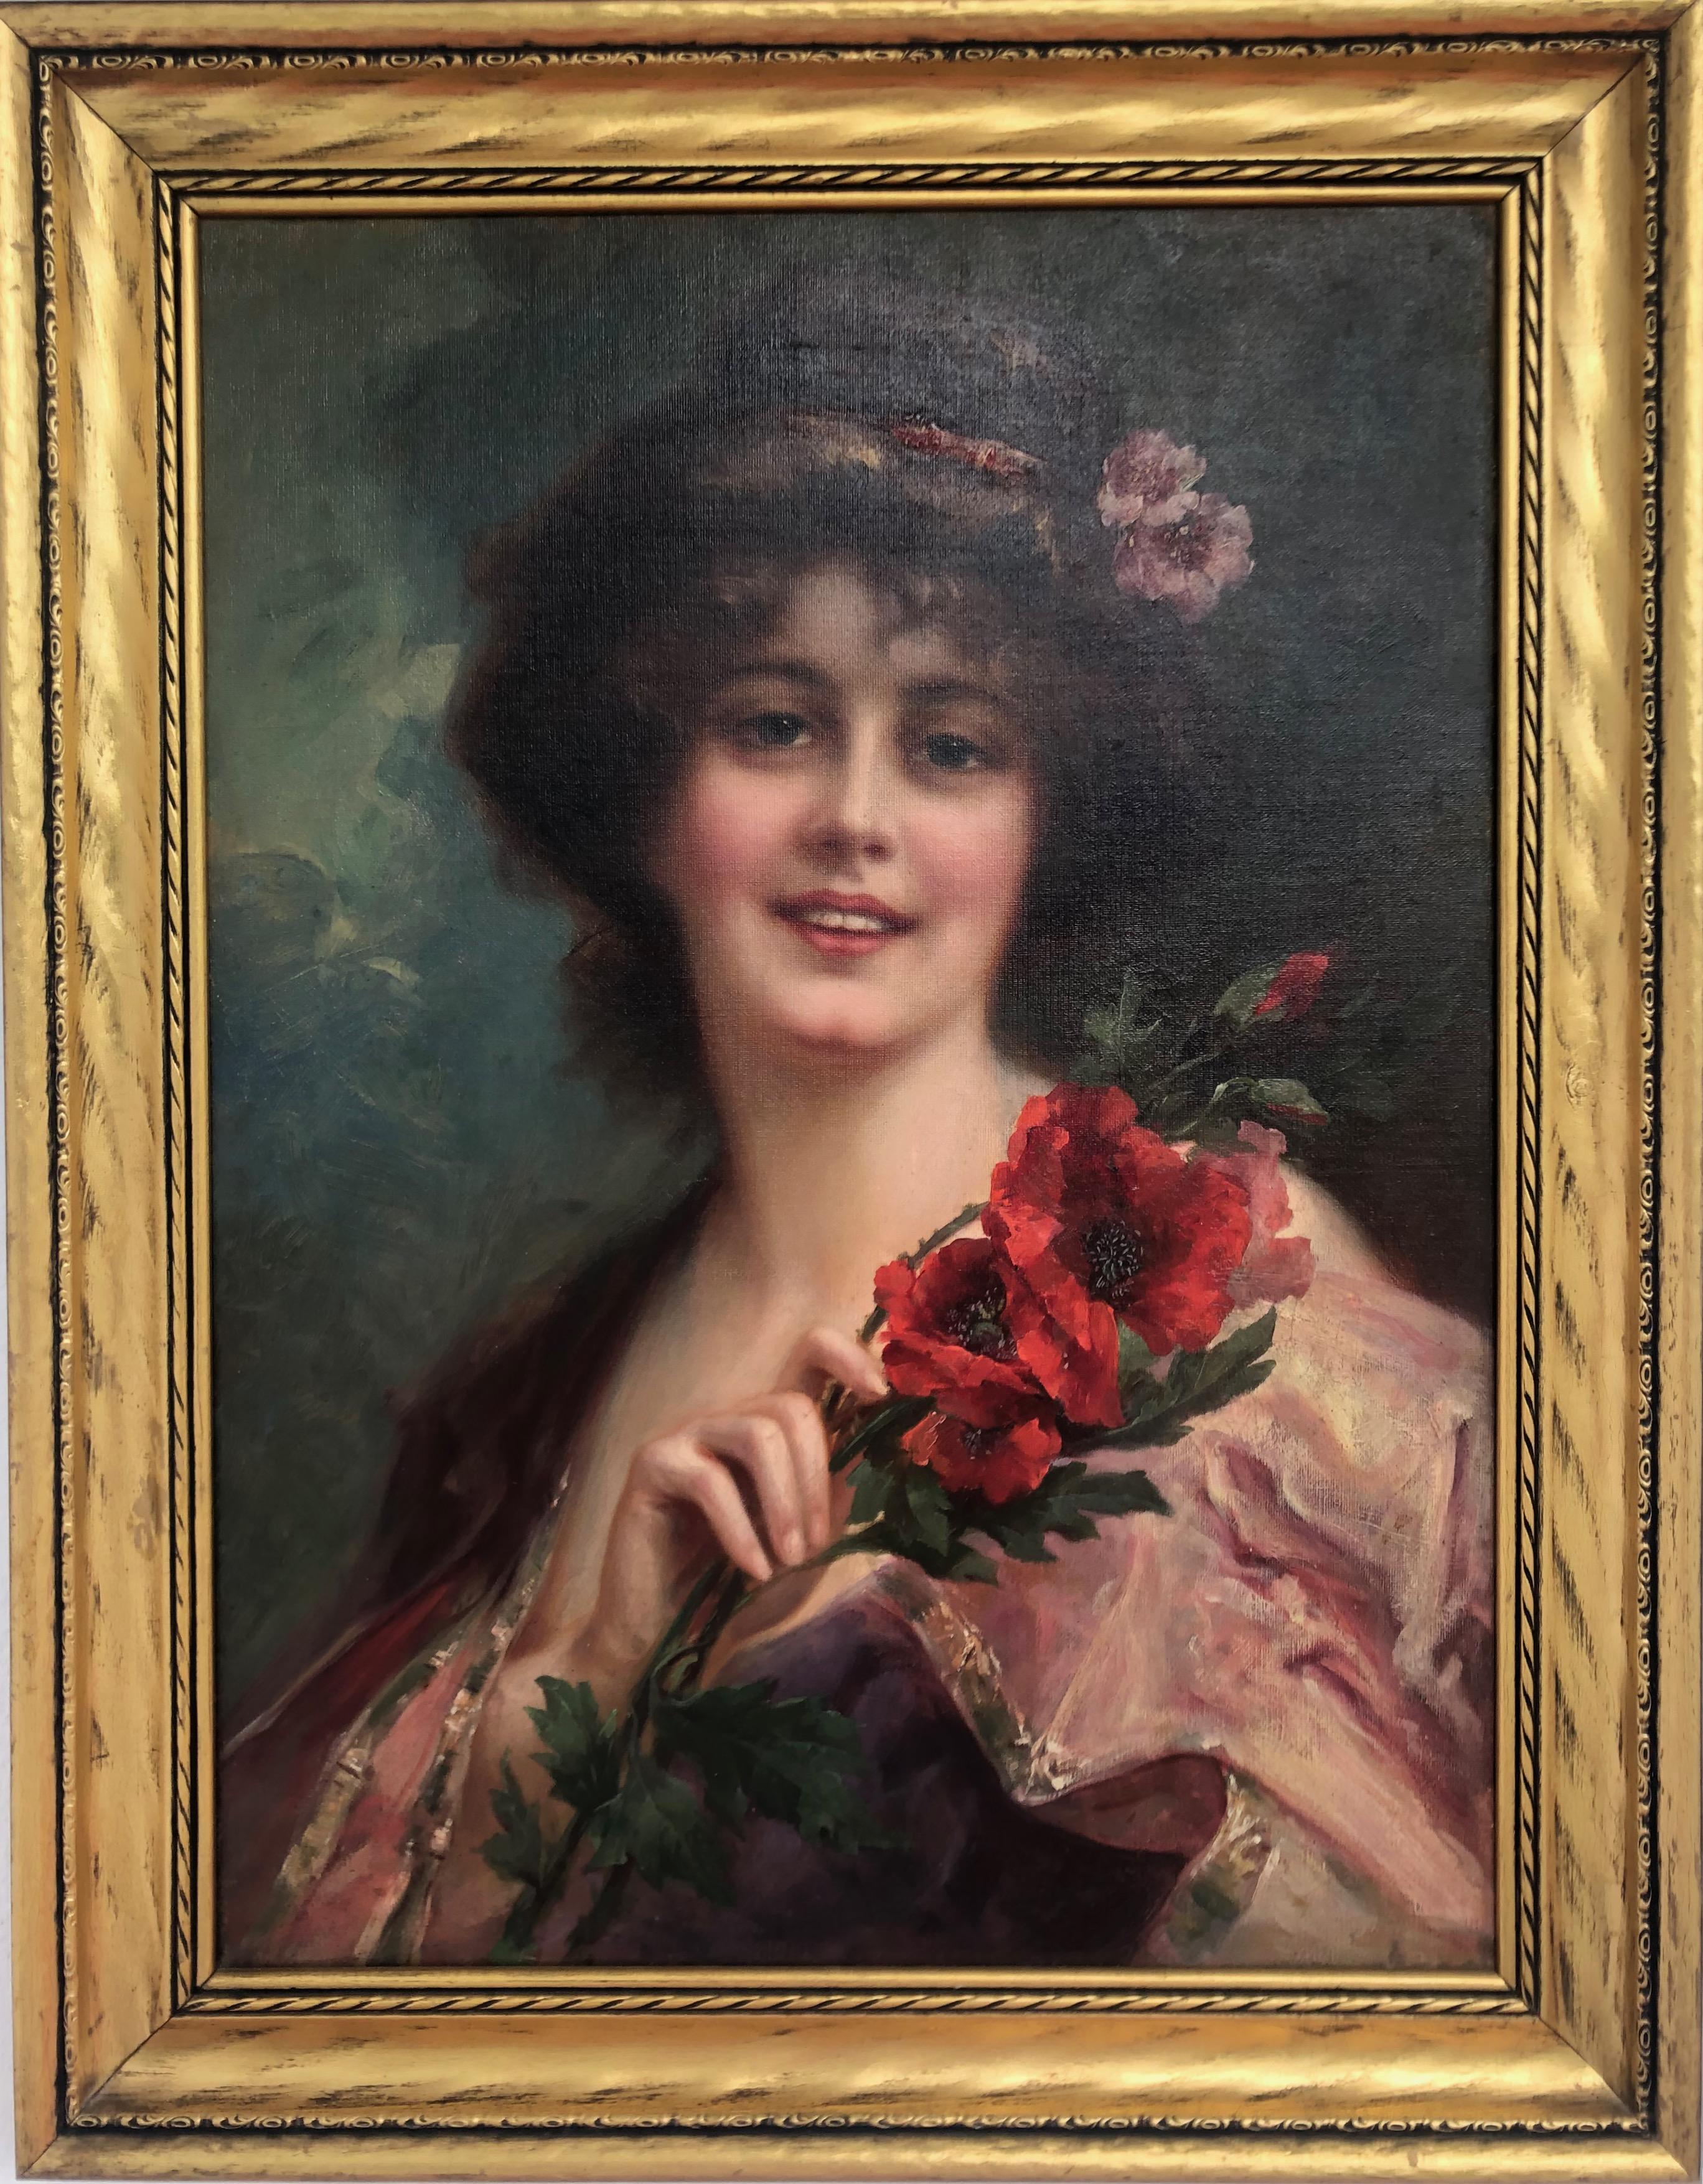 Lady Holding Bouquet Of Red Poppies  - Black Portrait Painting by William H. McEntee